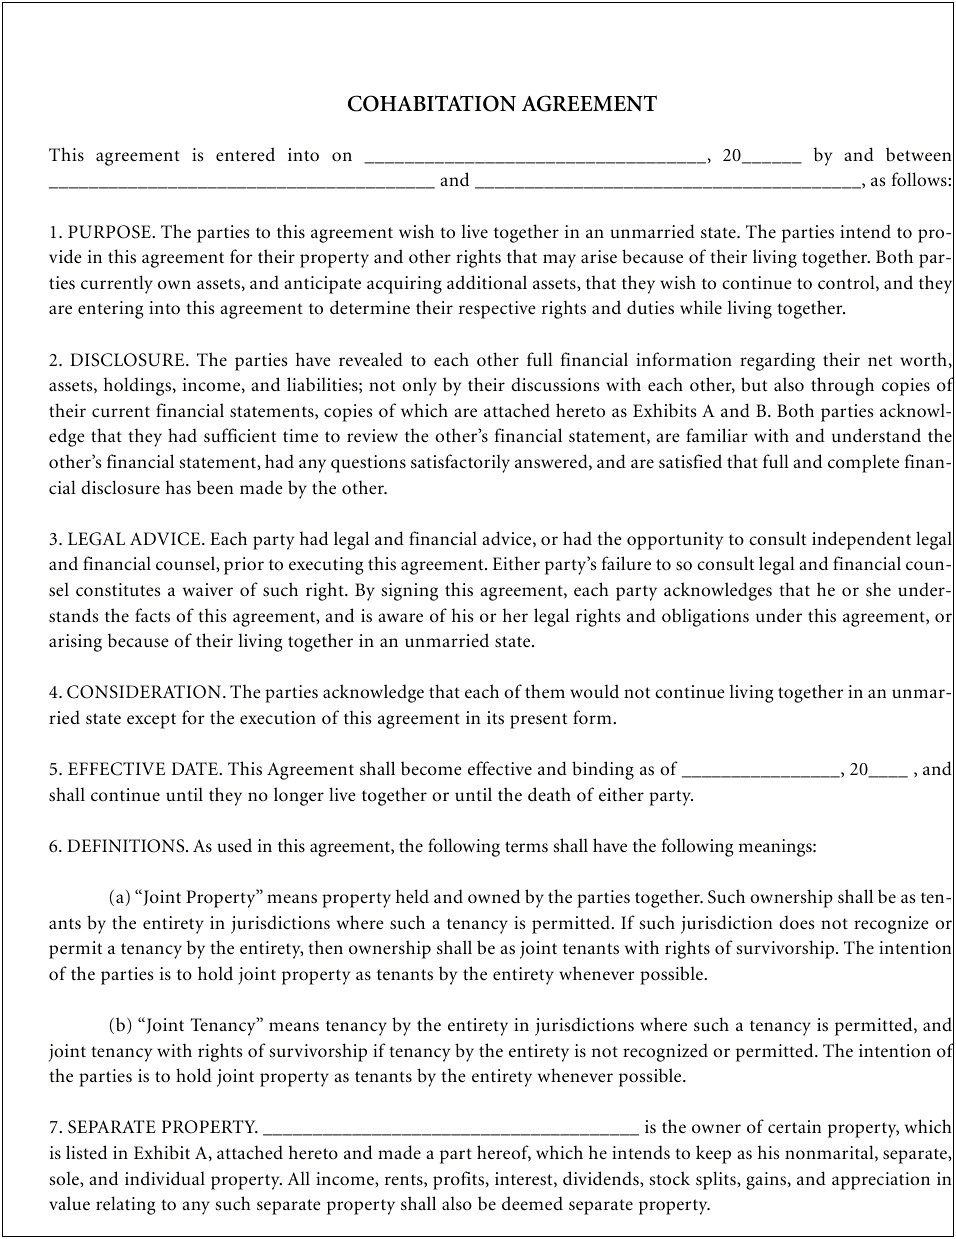 Living Together And Property Agreement Free Template Florida